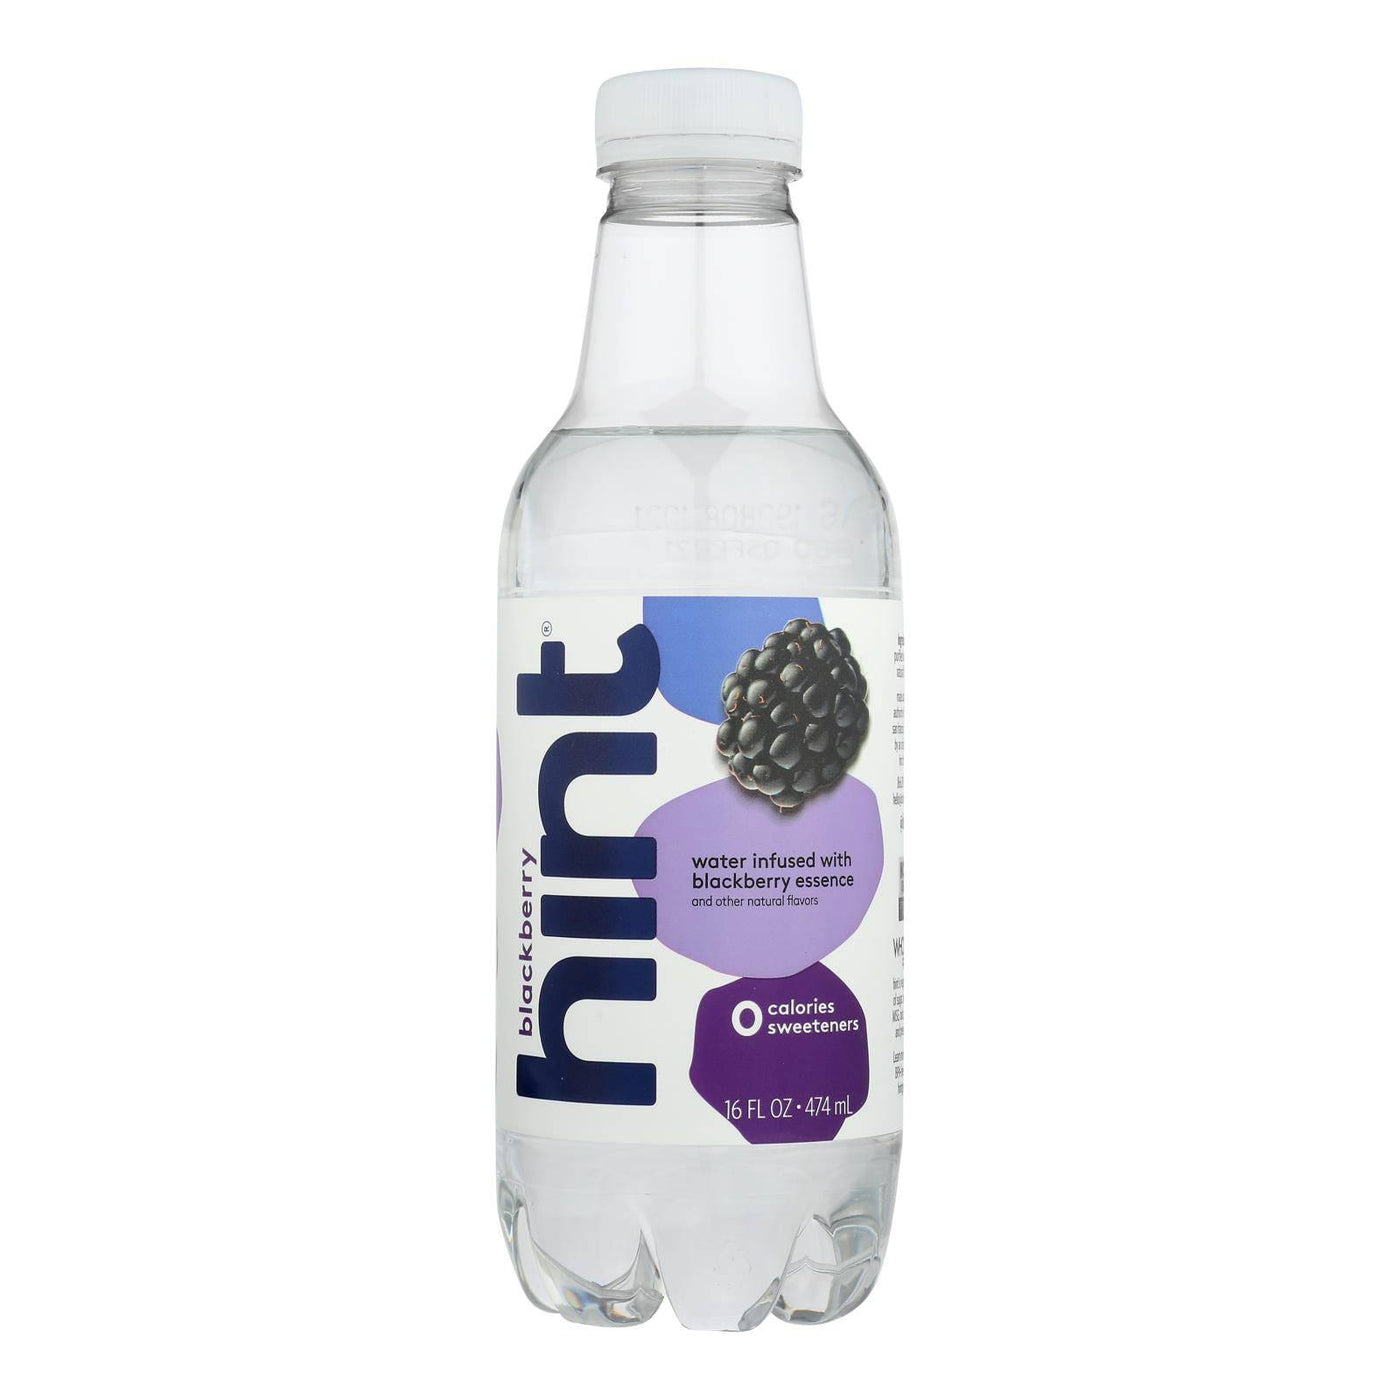 Buy Hint Blackberry Water - Blackberry - Case Of 12 - 16 Fl Oz.  at OnlyNaturals.us